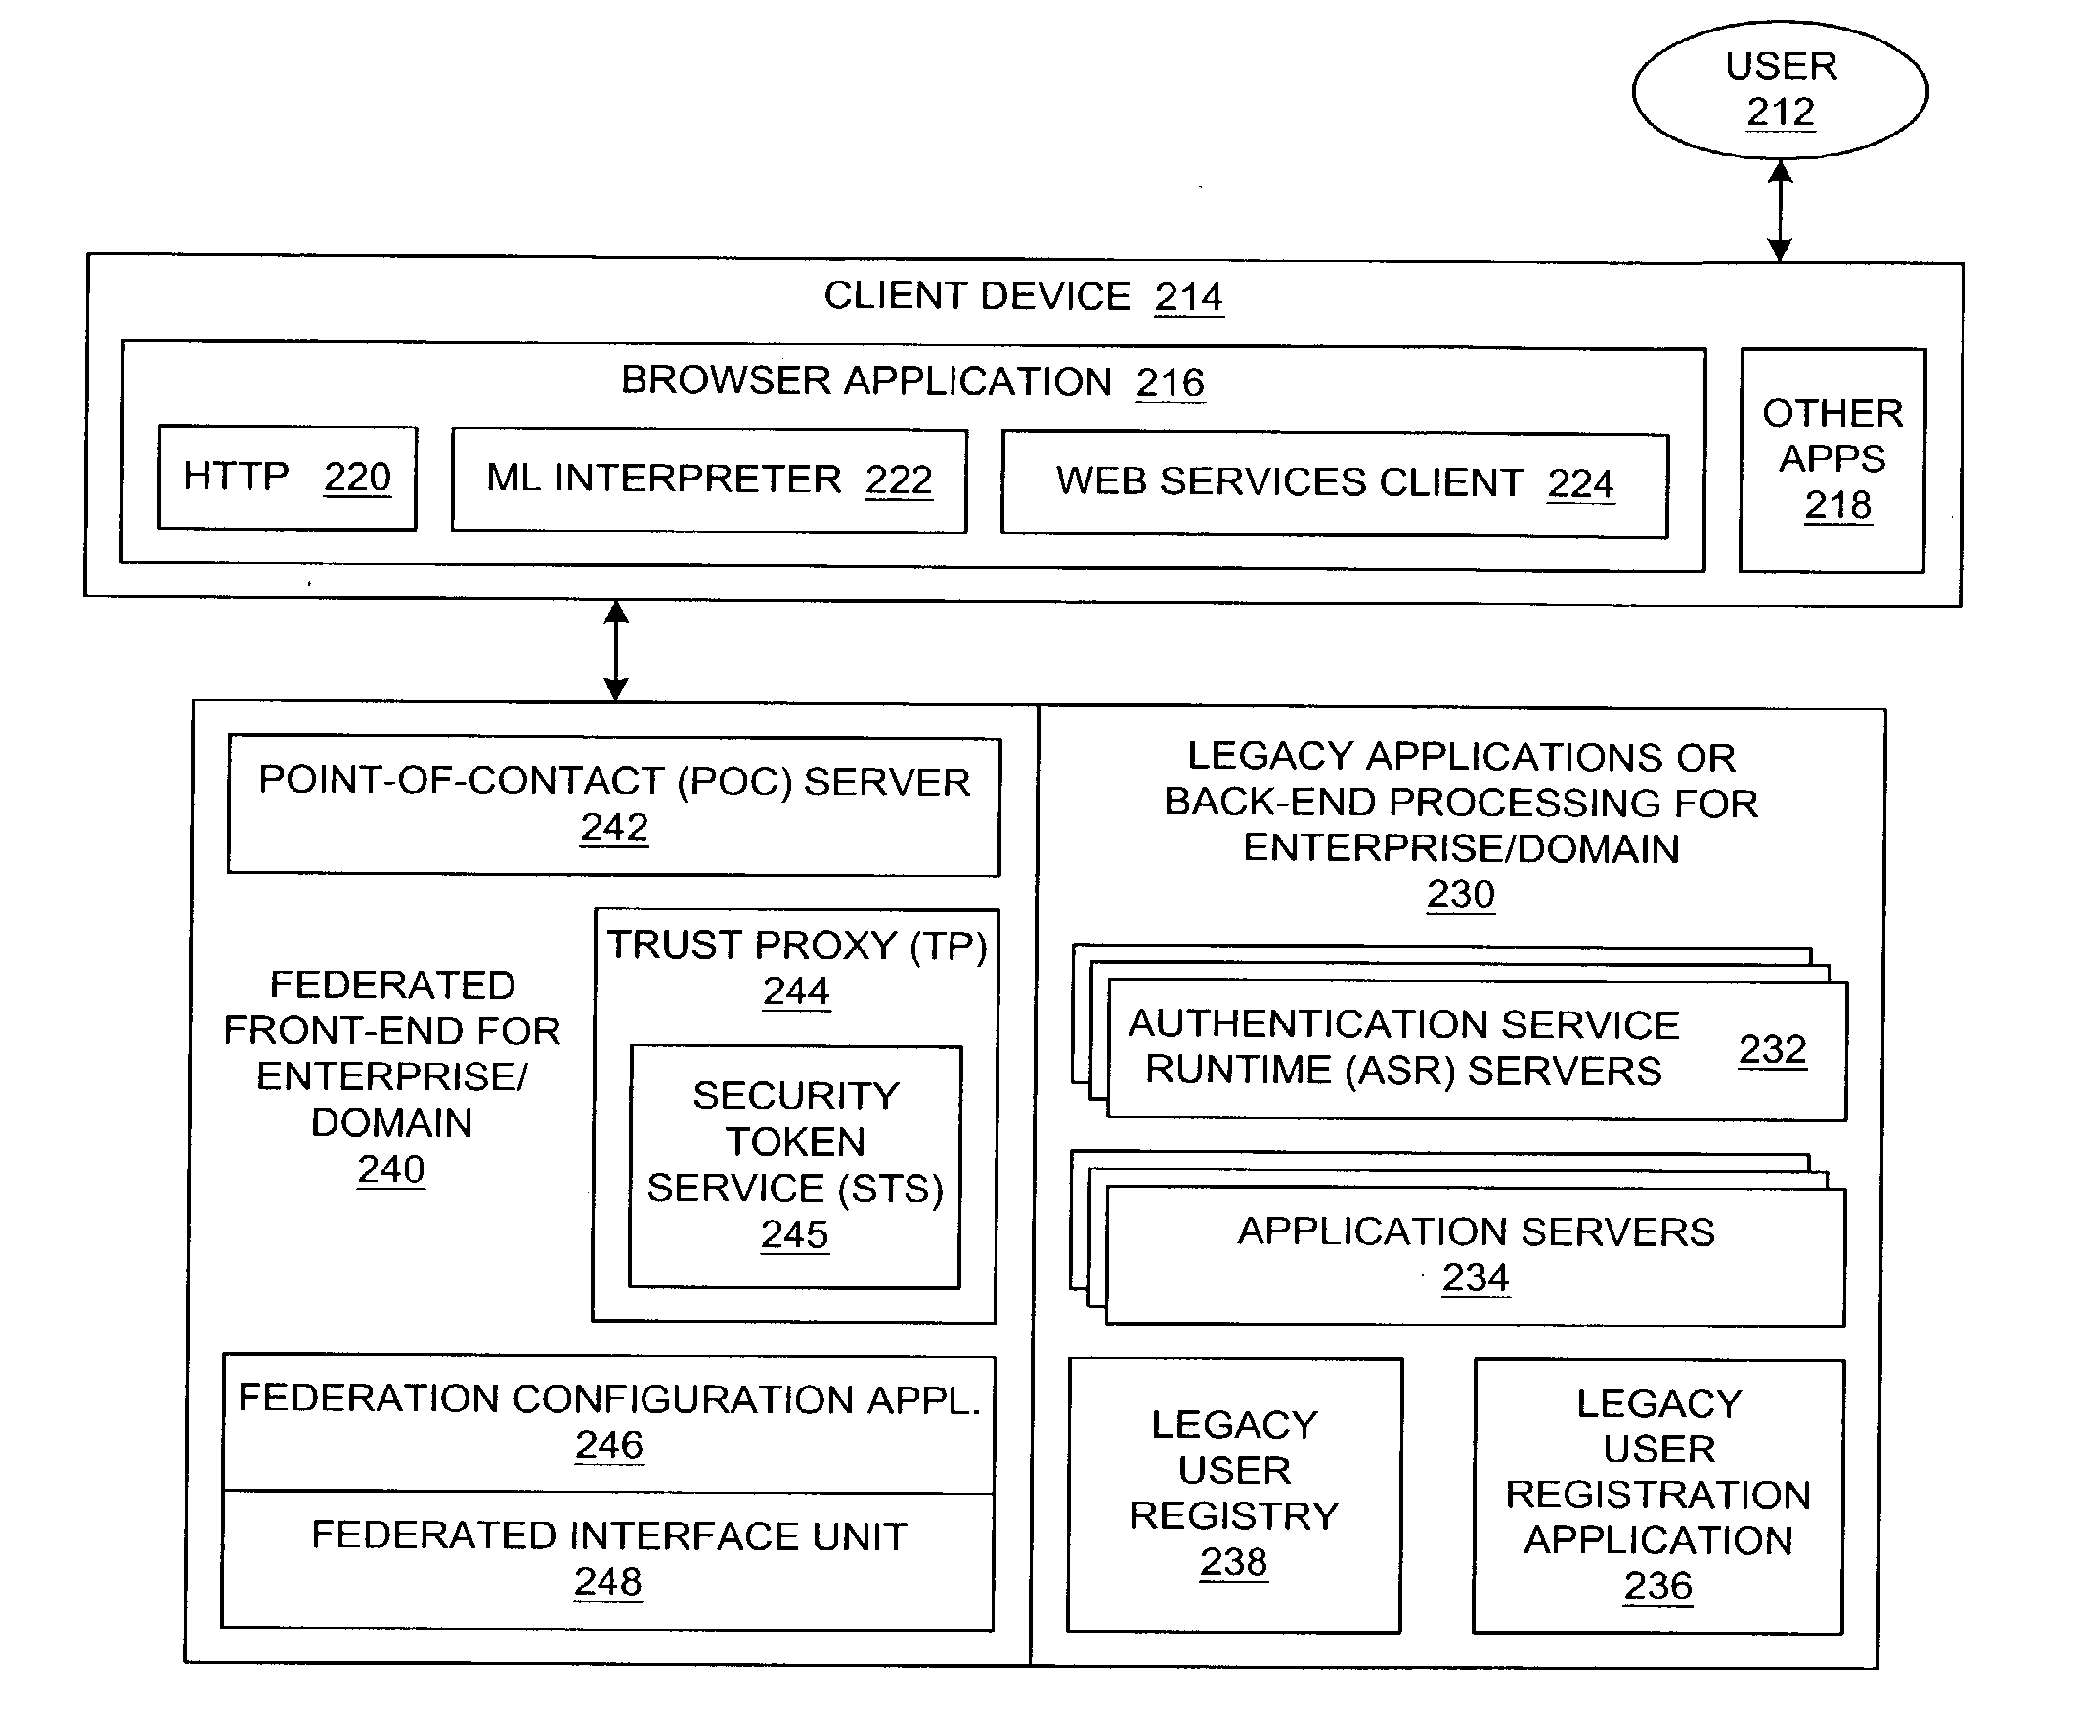 Method and system for native authentication protocols in a heterogeneous federated environment